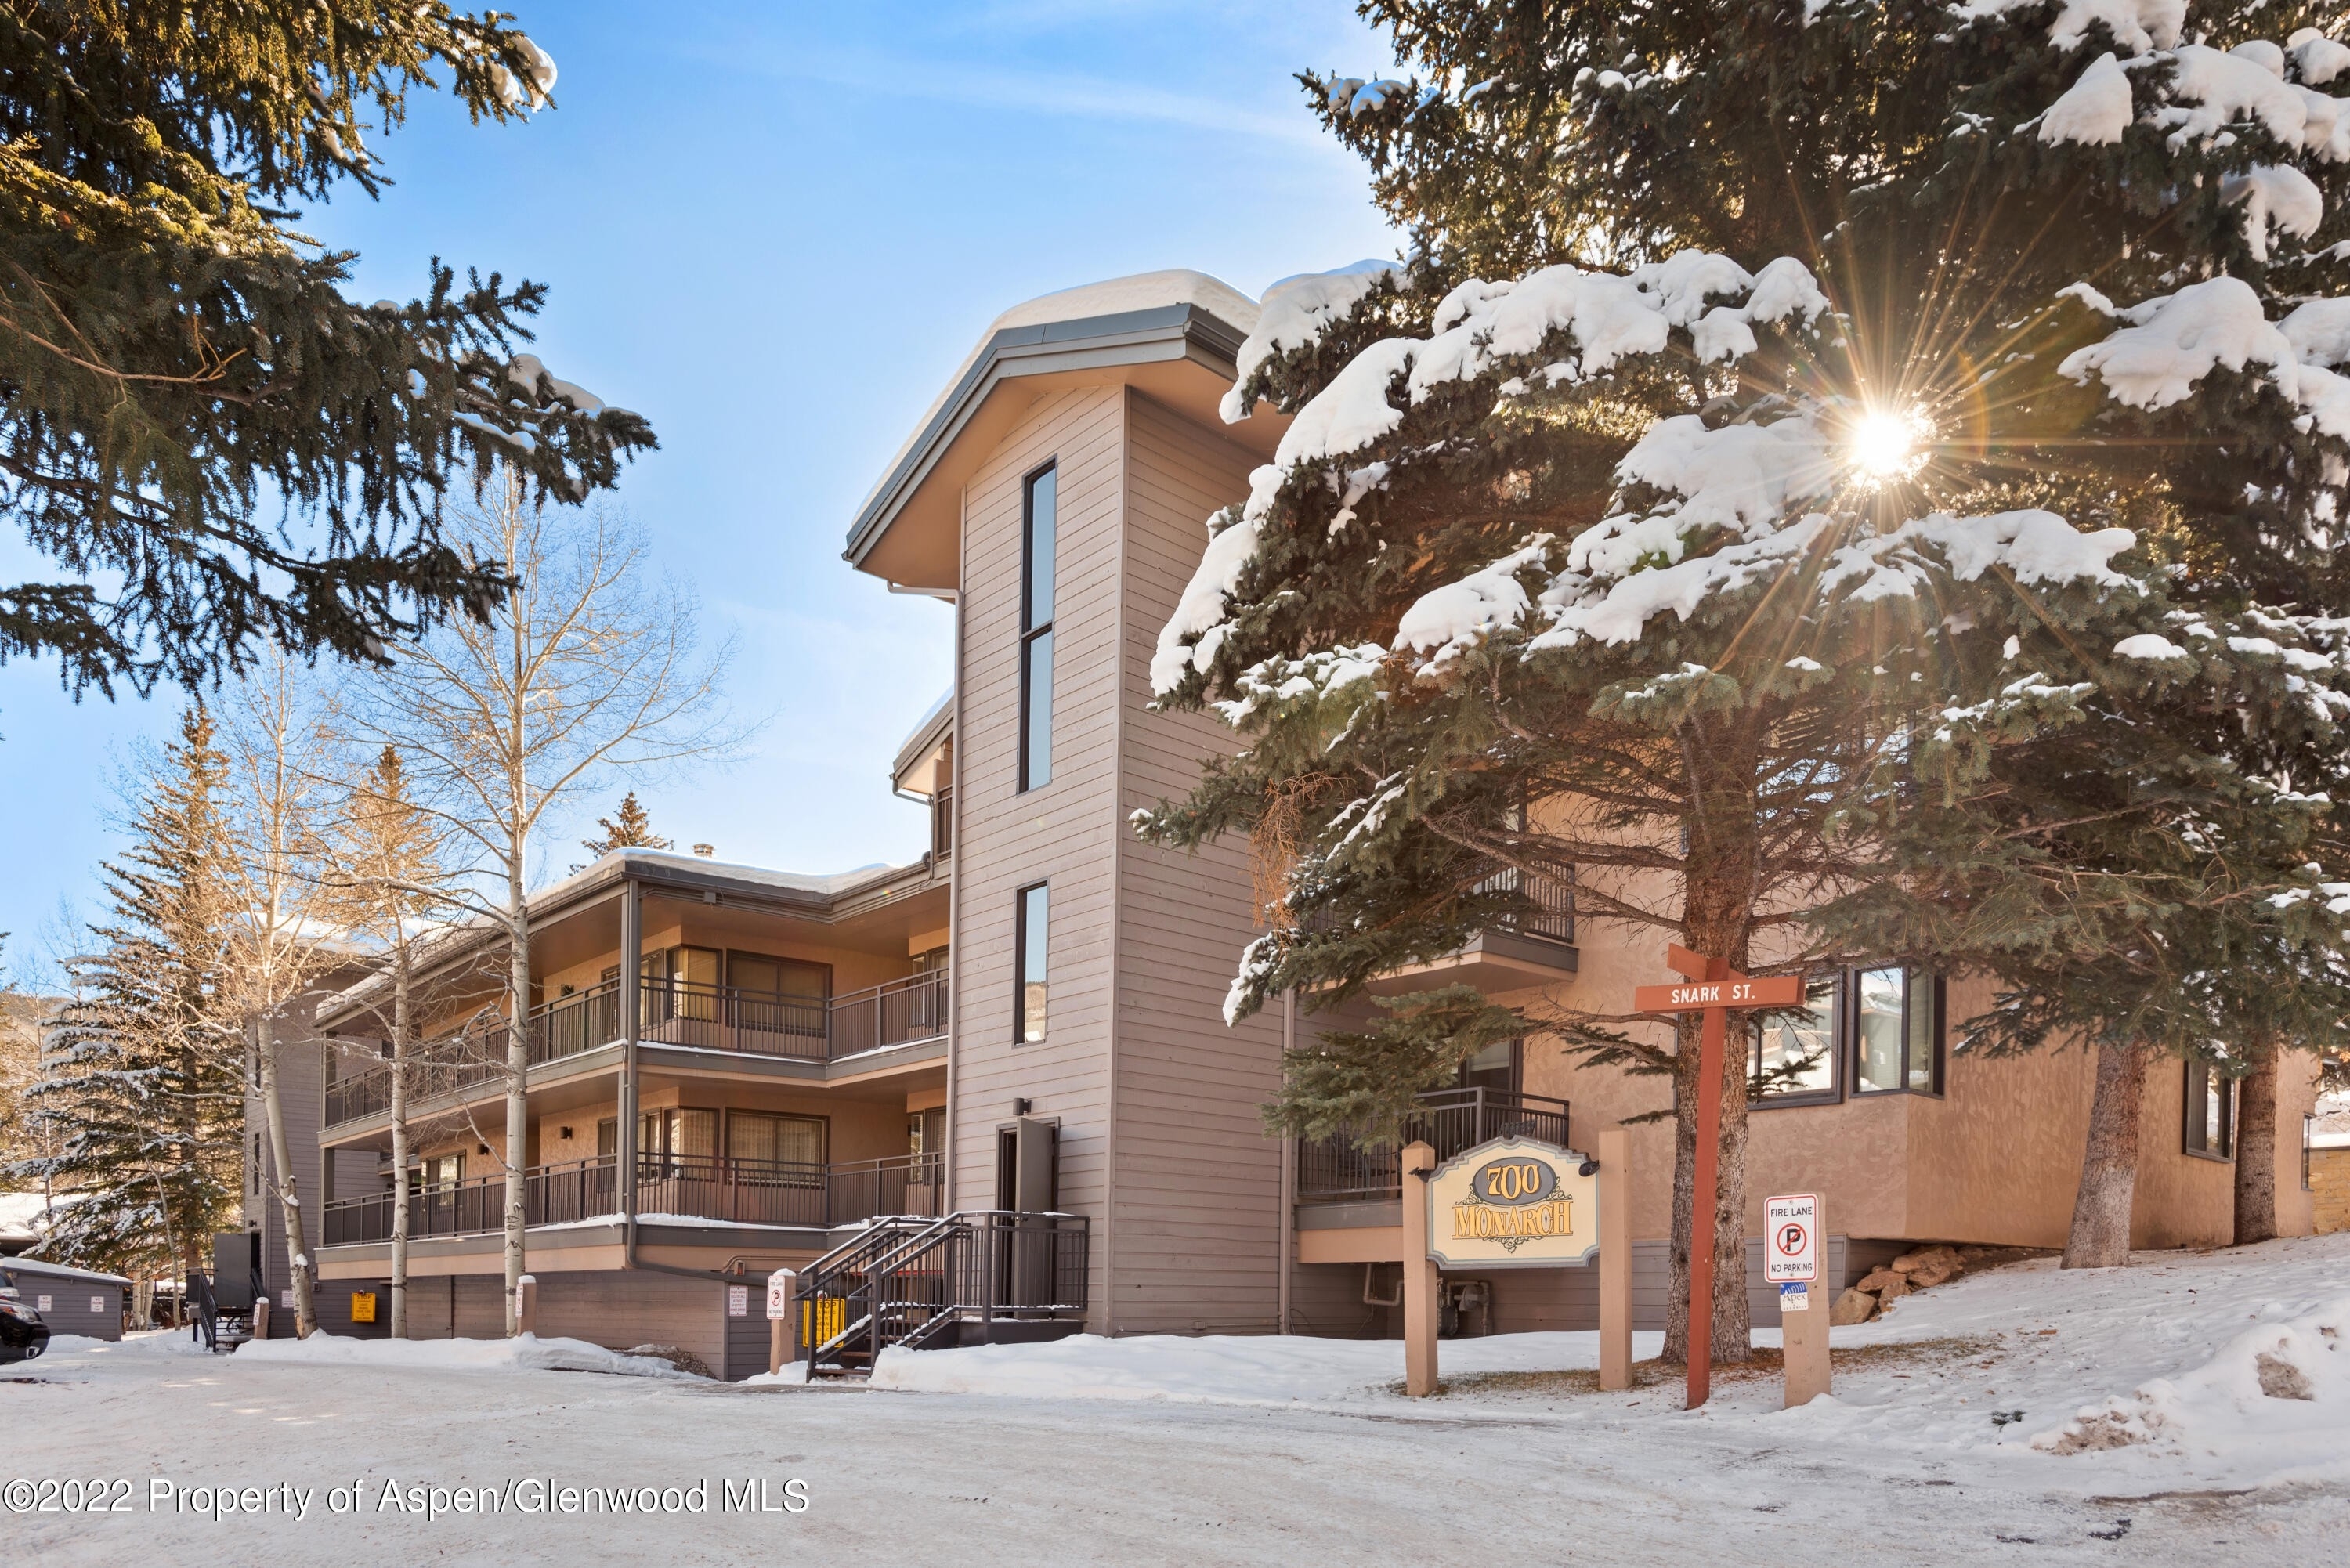 Single Family Home for Sale at 700 S Monarch Street, 305 Downtown Aspen, Aspen, CO 81611